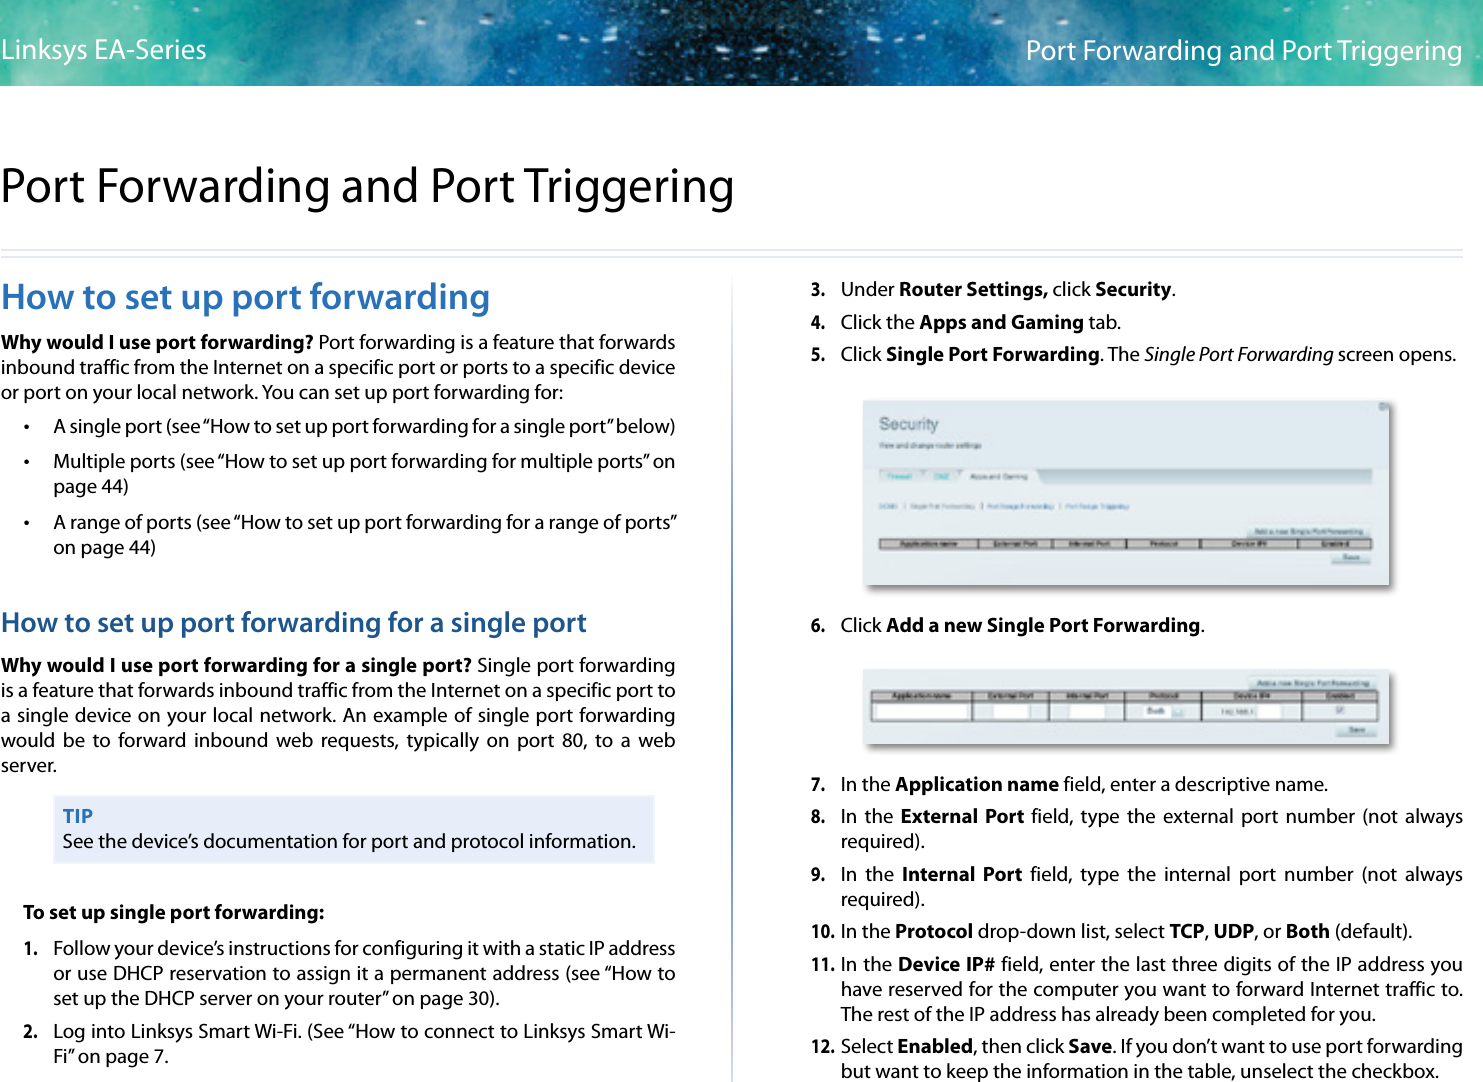 43Port Forwarding and Port TriggeringLinksys EA-Series43How to set up port forwardingWhy would I use port forwarding? Port forwarding is a feature that forwards inbound traffic from the Internet on a specific port or ports to a specific device or port on your local network. You can set up port forwarding for: •A single port (see “How to set up port forwarding for a single port” below) •Multiple ports (see “How to set up port forwarding for multiple ports” on page 44) •A range of ports (see “How to set up port forwarding for a range of ports” on page 44)How to set up port forwarding for a single portWhy would I use port forwarding for a single port? Single port forwarding is a feature that forwards inbound traffic from the Internet on a specific port to a single device on your local network. An example of single port forwarding would be to forward inbound web requests, typically on port 80, to a web server. TIPSee the device’s documentation for port and protocol information.To set up single port forwarding:1. Follow your device’s instructions for configuring it with a static IP address or use DHCP reservation to assign it a permanent address (see “How to set up the DHCP server on your router” on page 30).2. Log into Linksys Smart Wi-Fi. (See “How to connect to Linksys Smart Wi-Fi” on page 7.3. Under Router Settings, click Security. 4. Click the Apps and Gaming tab.5. Click Single Port Forwarding. The Single Port Forwarding screen opens.6. Click Add a new Single Port Forwarding.7. In the Application name field, enter a descriptive name.8. In the External Port field, type the external port number (not always required).9. In the Internal Port field, type the internal port number (not always required).10. In the Protocol drop-down list, select TCP, UDP, or Both (default).11. In the Device IP# field, enter the last three digits of the IP address you have reserved for the computer you want to forward Internet traffic to. The rest of the IP address has already been completed for you. 12. Select Enabled, then click Save. If you don’t want to use port forwarding but want to keep the information in the table, unselect the checkbox.Port Forwarding and Port Triggering